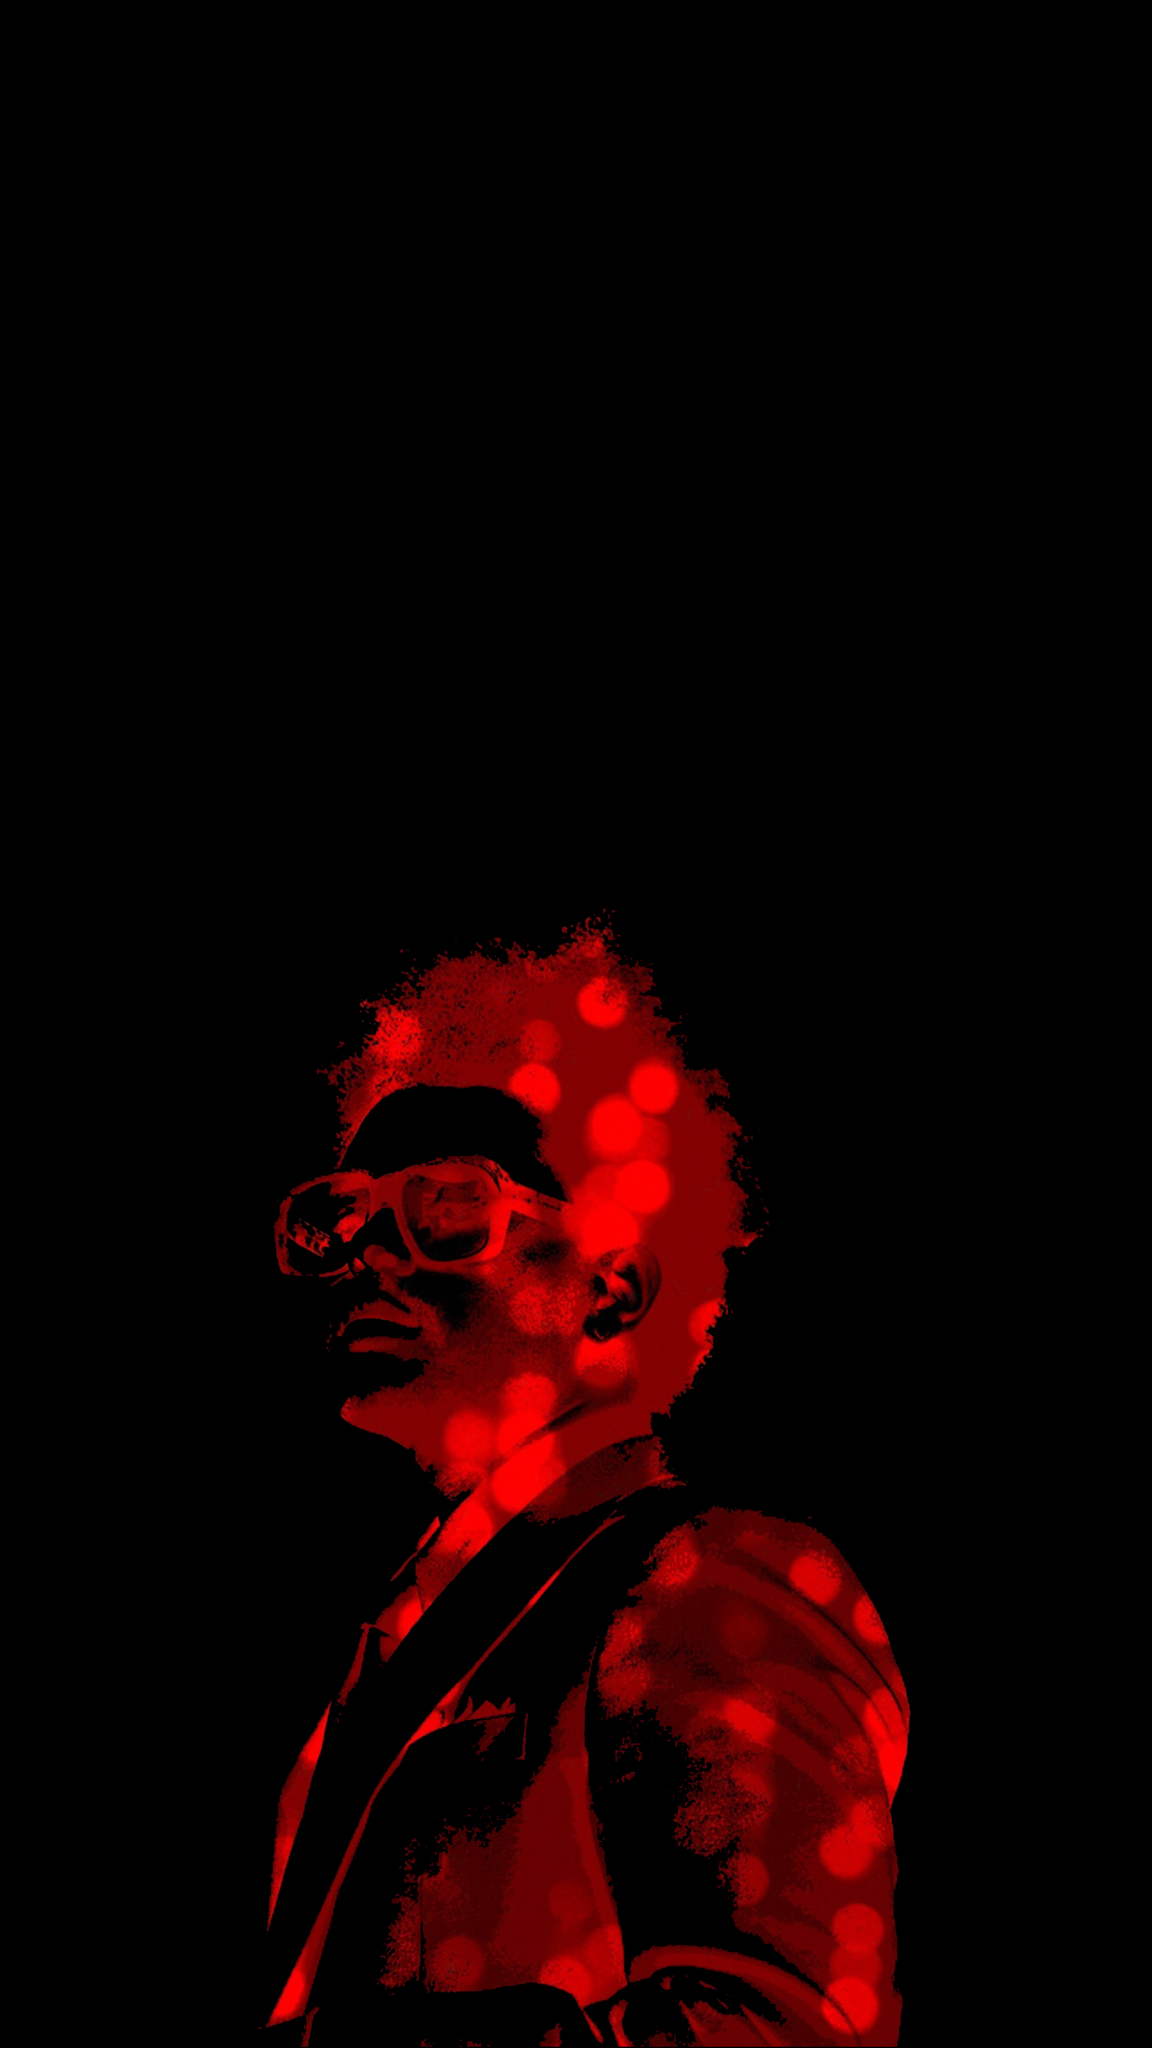 1152x2048 The Weeknd After Hours AMOLED Mobile Wallpapers (2160x3840) Album on Imgur | The weeknd wallpaper iphone, The weeknd poster, The weeknd background